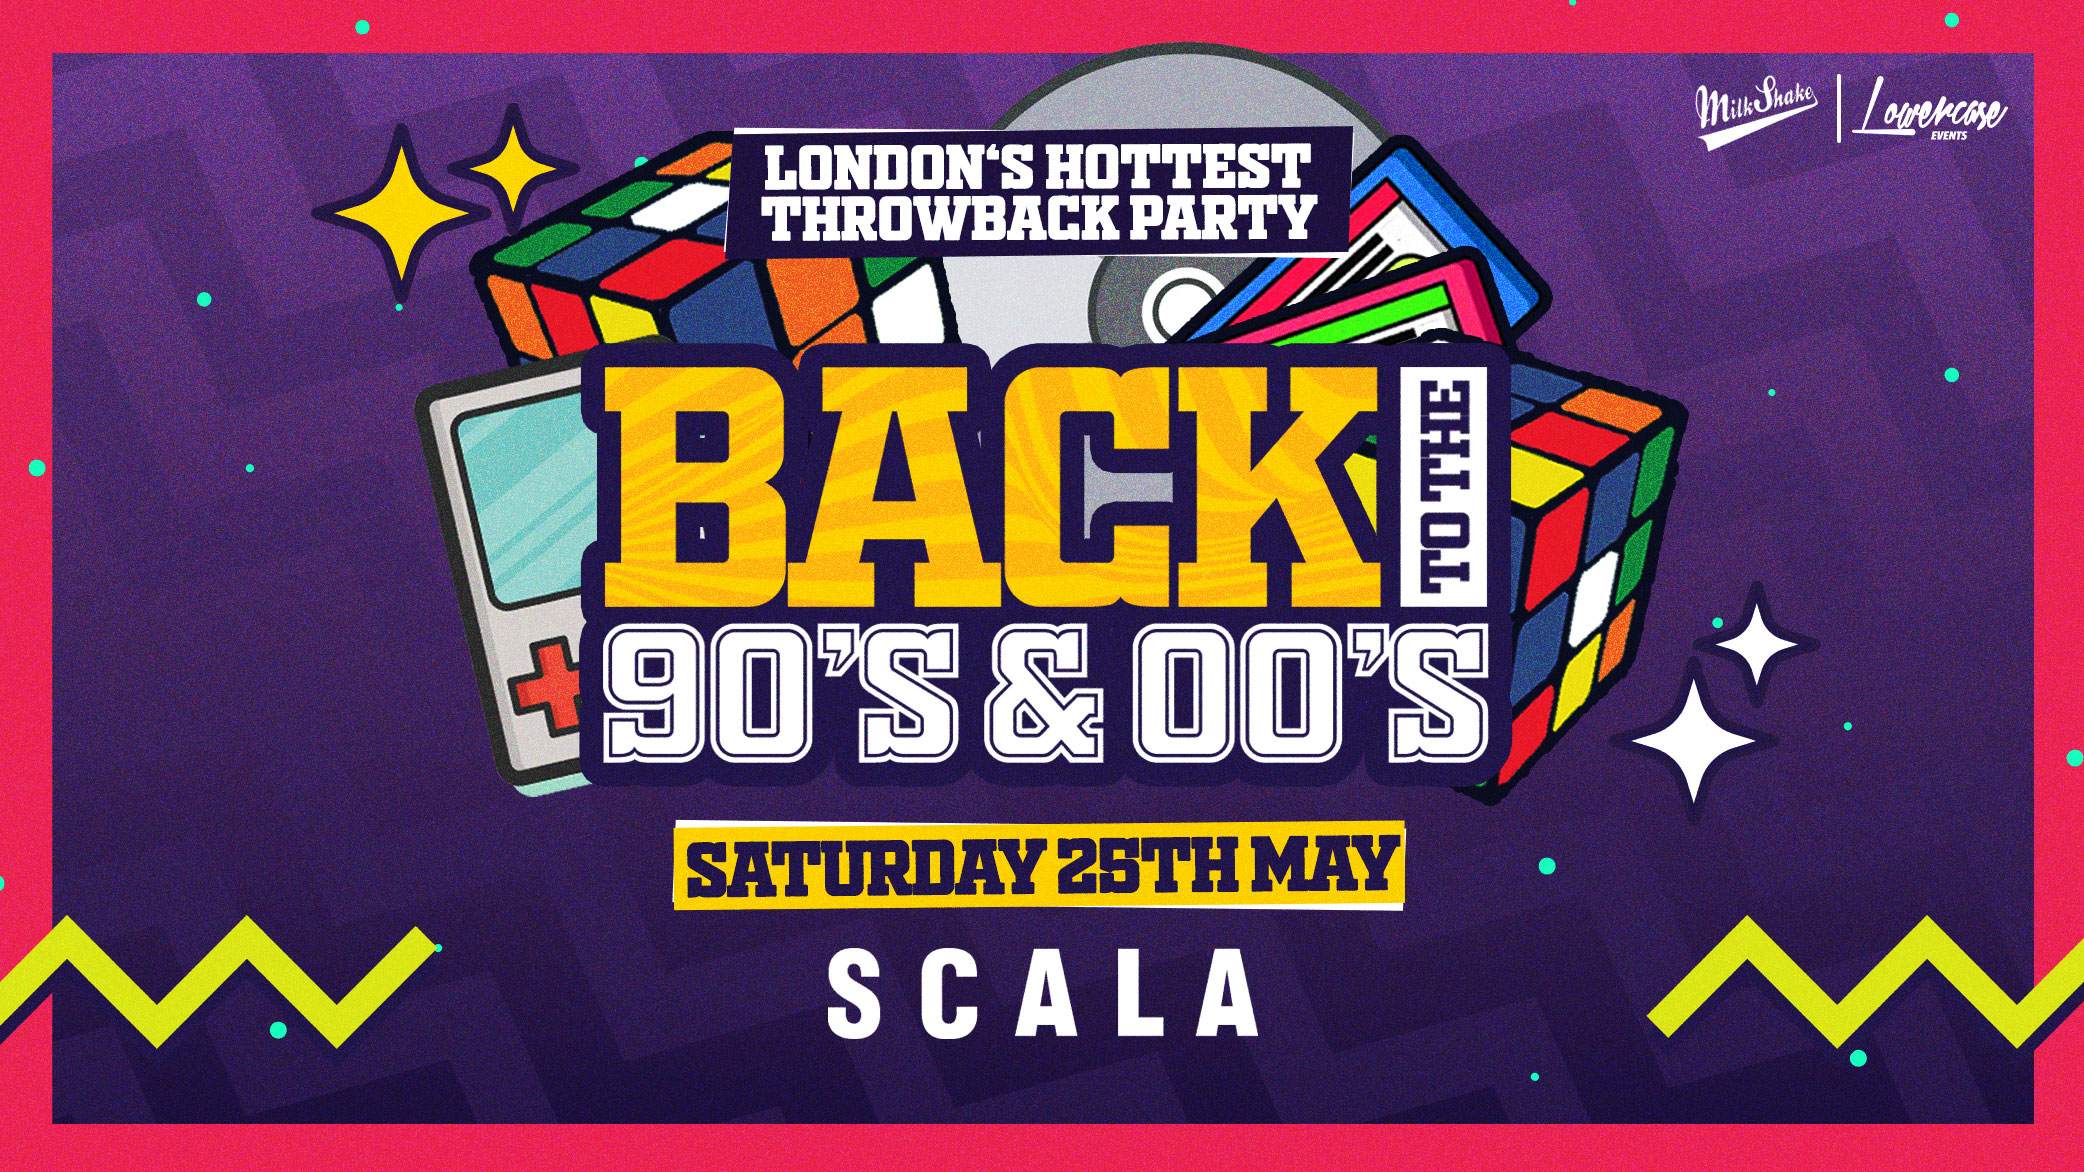 Back to the 90s & 00s Throwback Rave - Página frontal